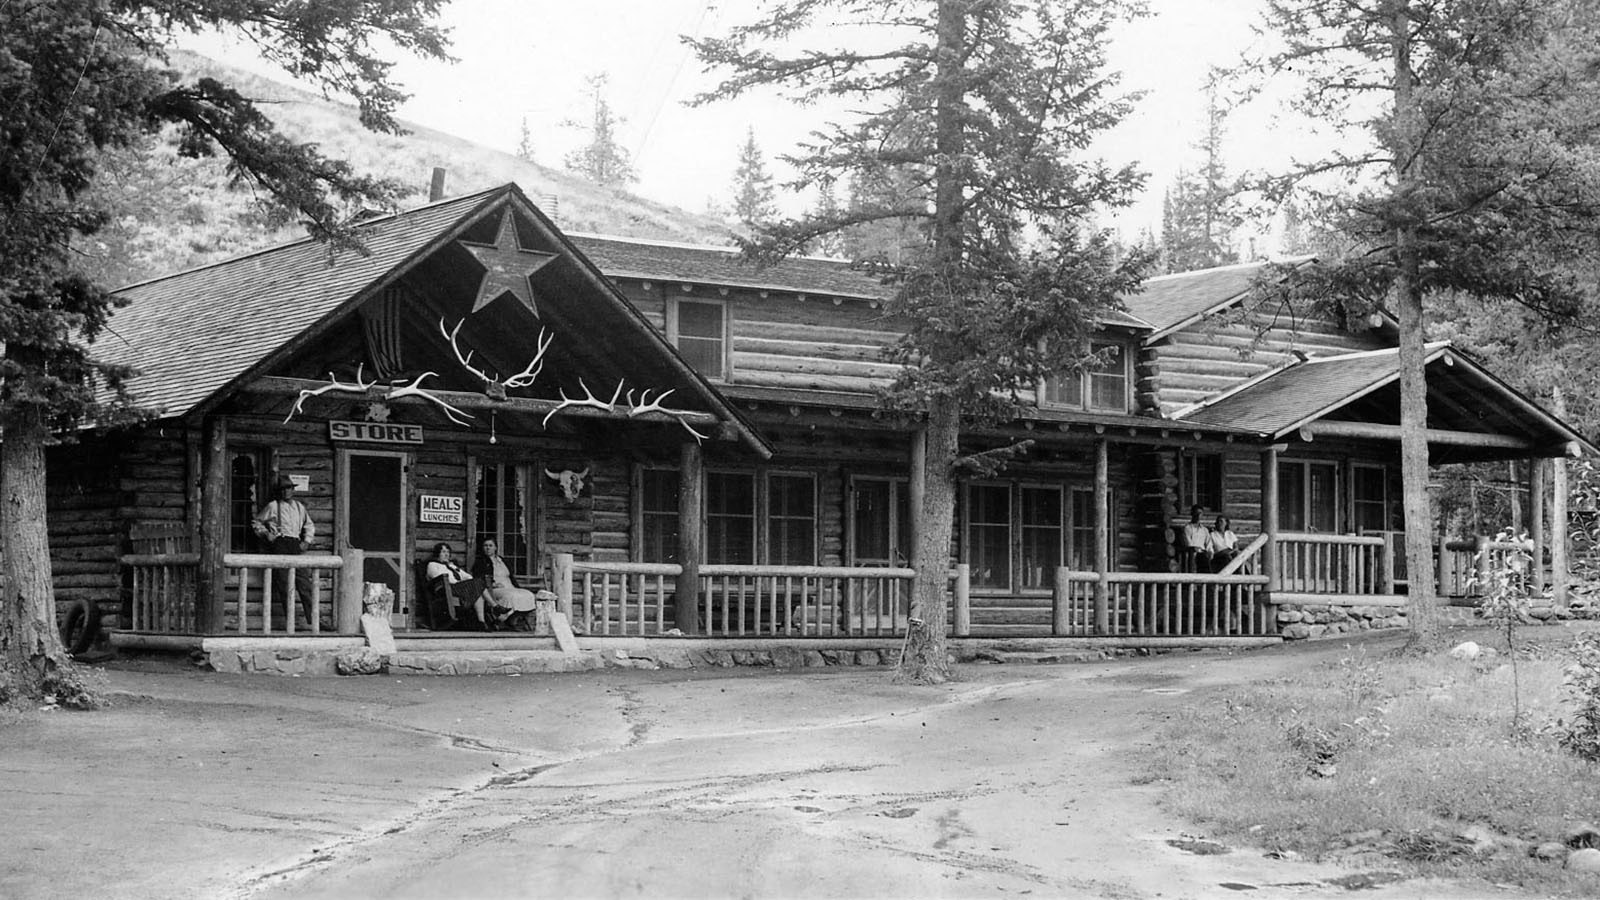 The Shoshone Lodge is one of the many historic ranches featured on Park County's interactive historic photos database. Initially known as the Red Star Camp, the lodge along Grinnell Creek was built by Henry Dahlem in 1928 at the site of an old trapper’s camp. During World War II, the name of the ranch was changed to Shoshone Lodge.